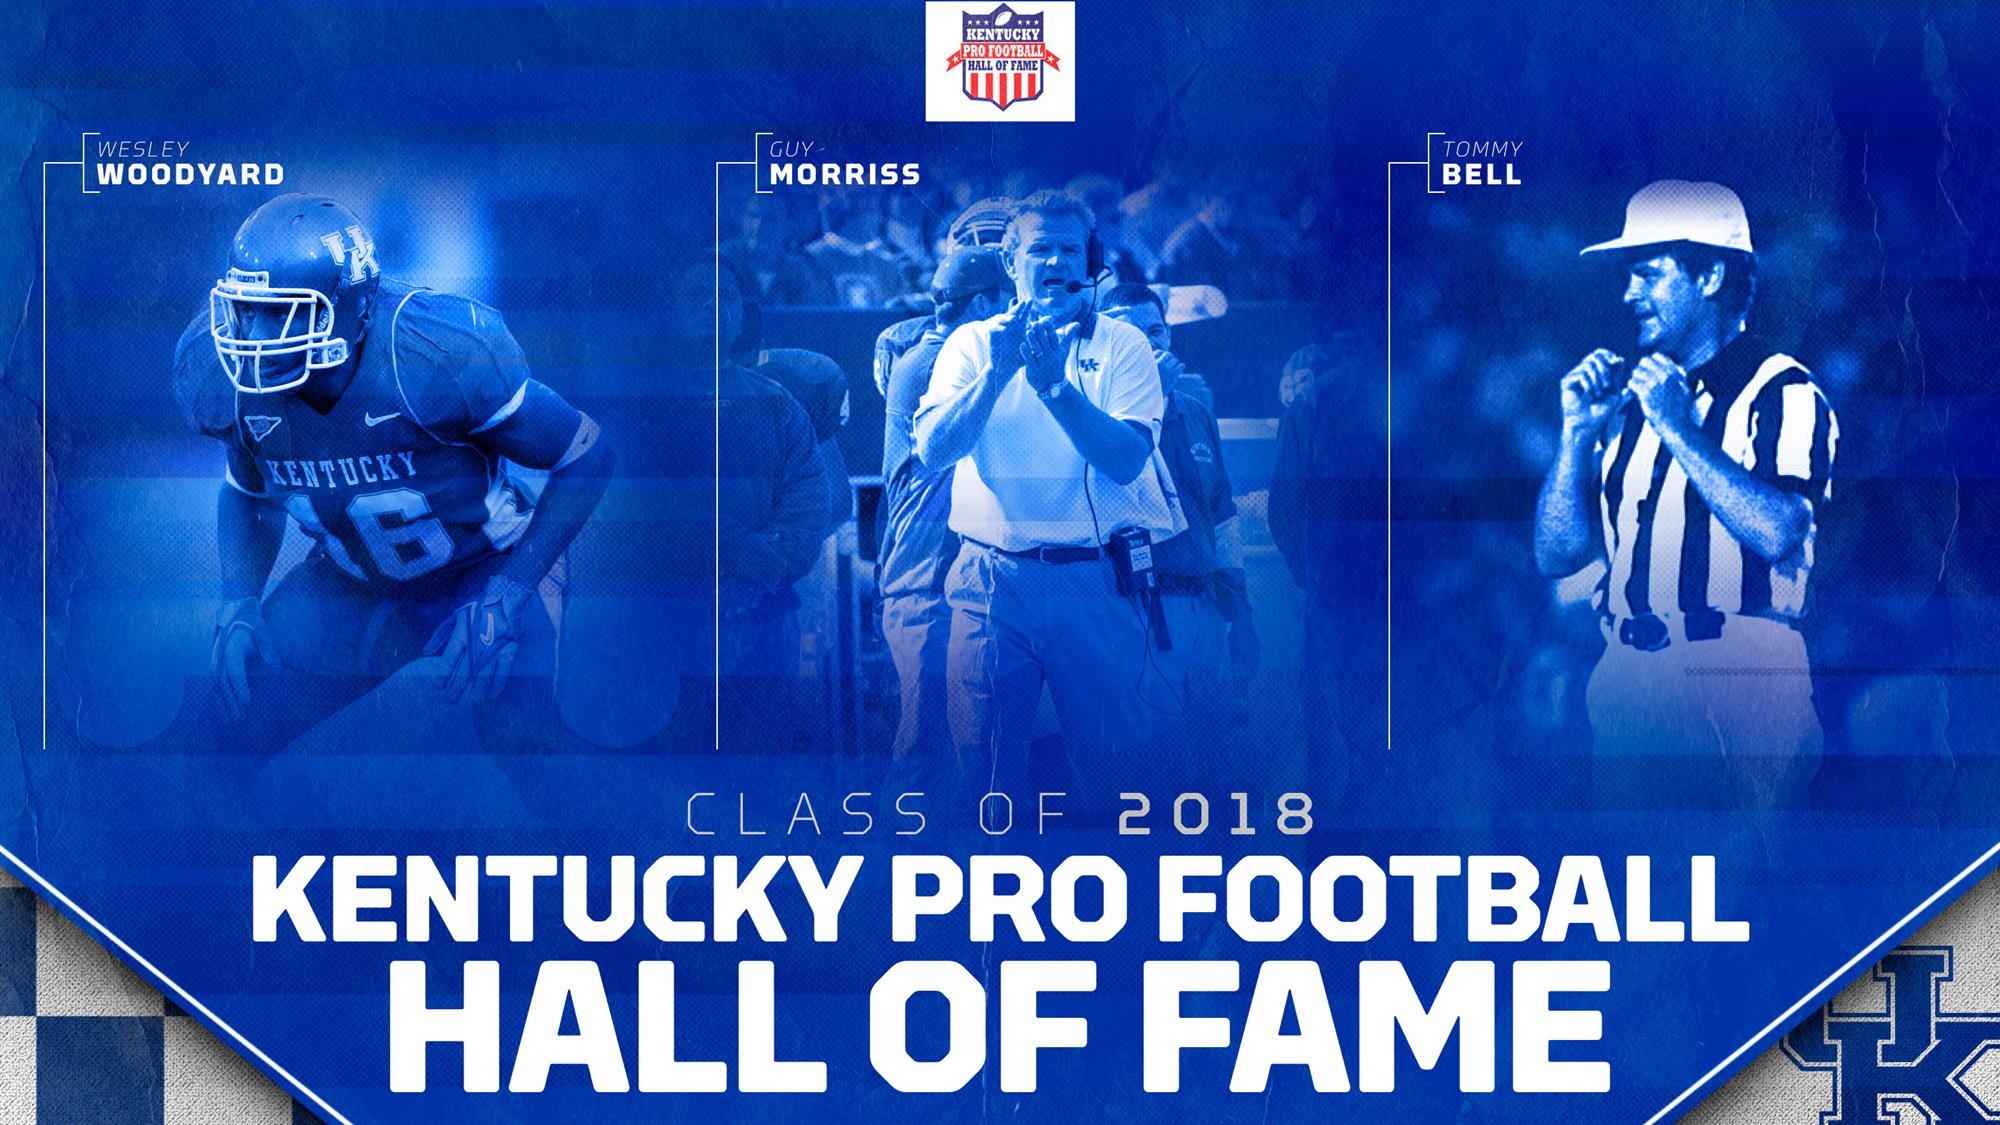 Wesley Woodyard, Guy Morriss and Tommy Bell to be Inducted into Kentucky Pro Football Hall of Fame Friday